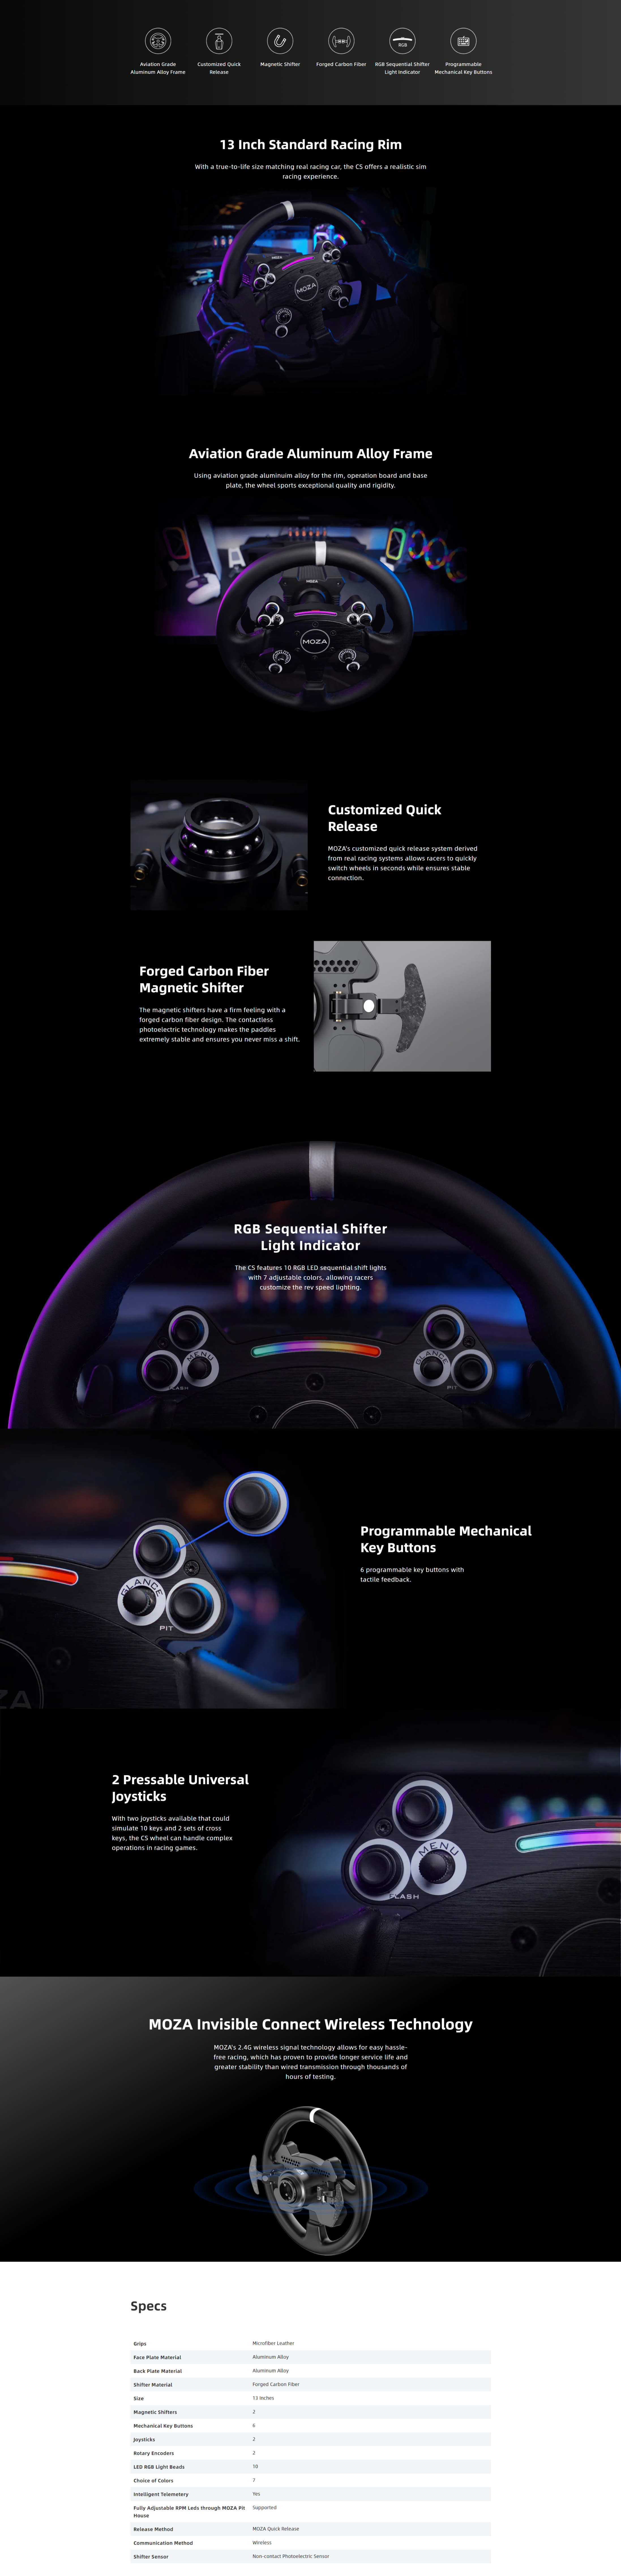 A large marketing image providing additional information about the product MOZA CS V2 Steering Wheel - Additional alt info not provided